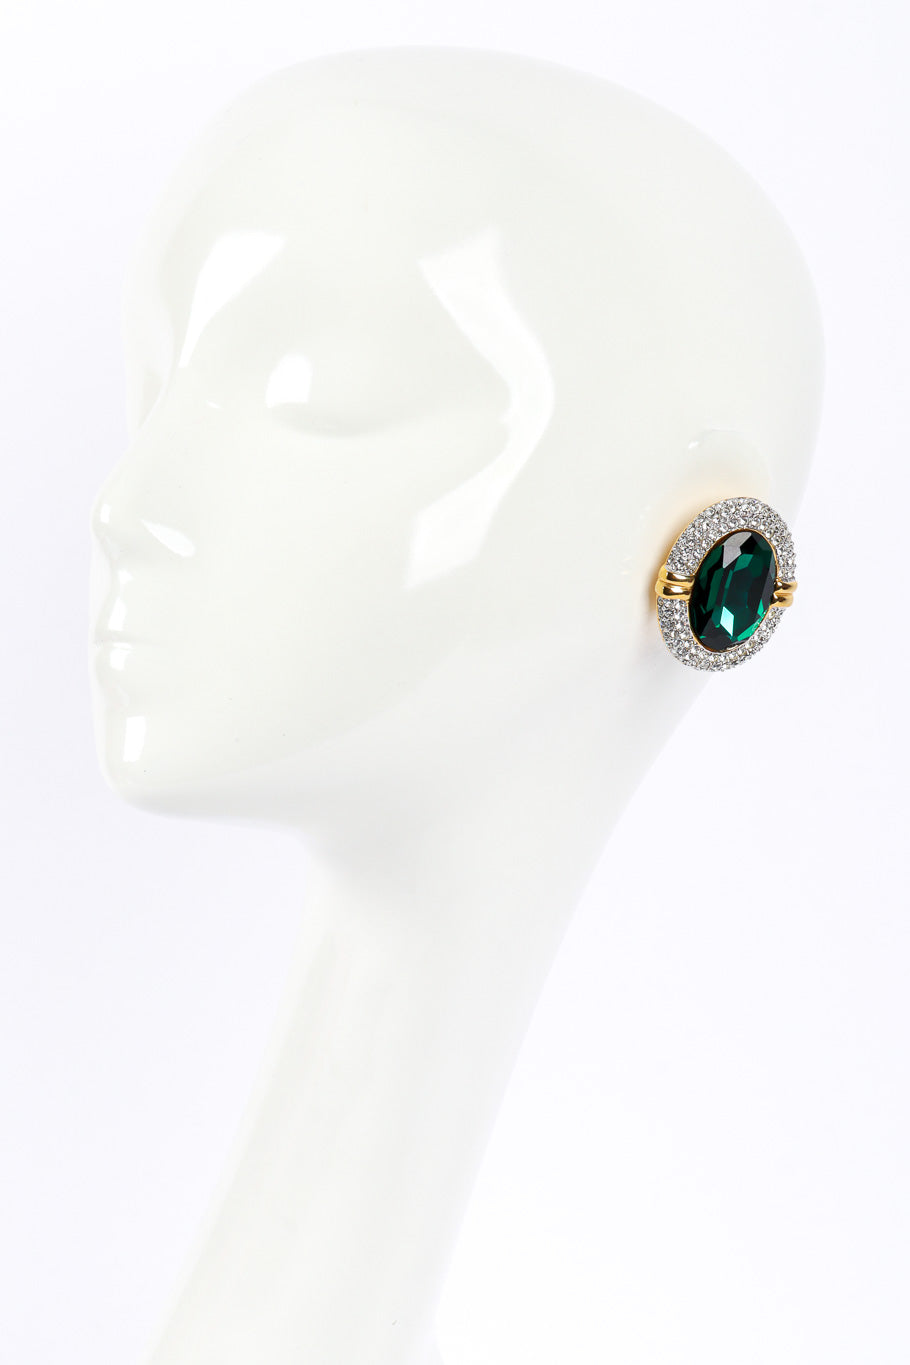 Emerald Oval Earrings by Valentino on mannequin head @recessla